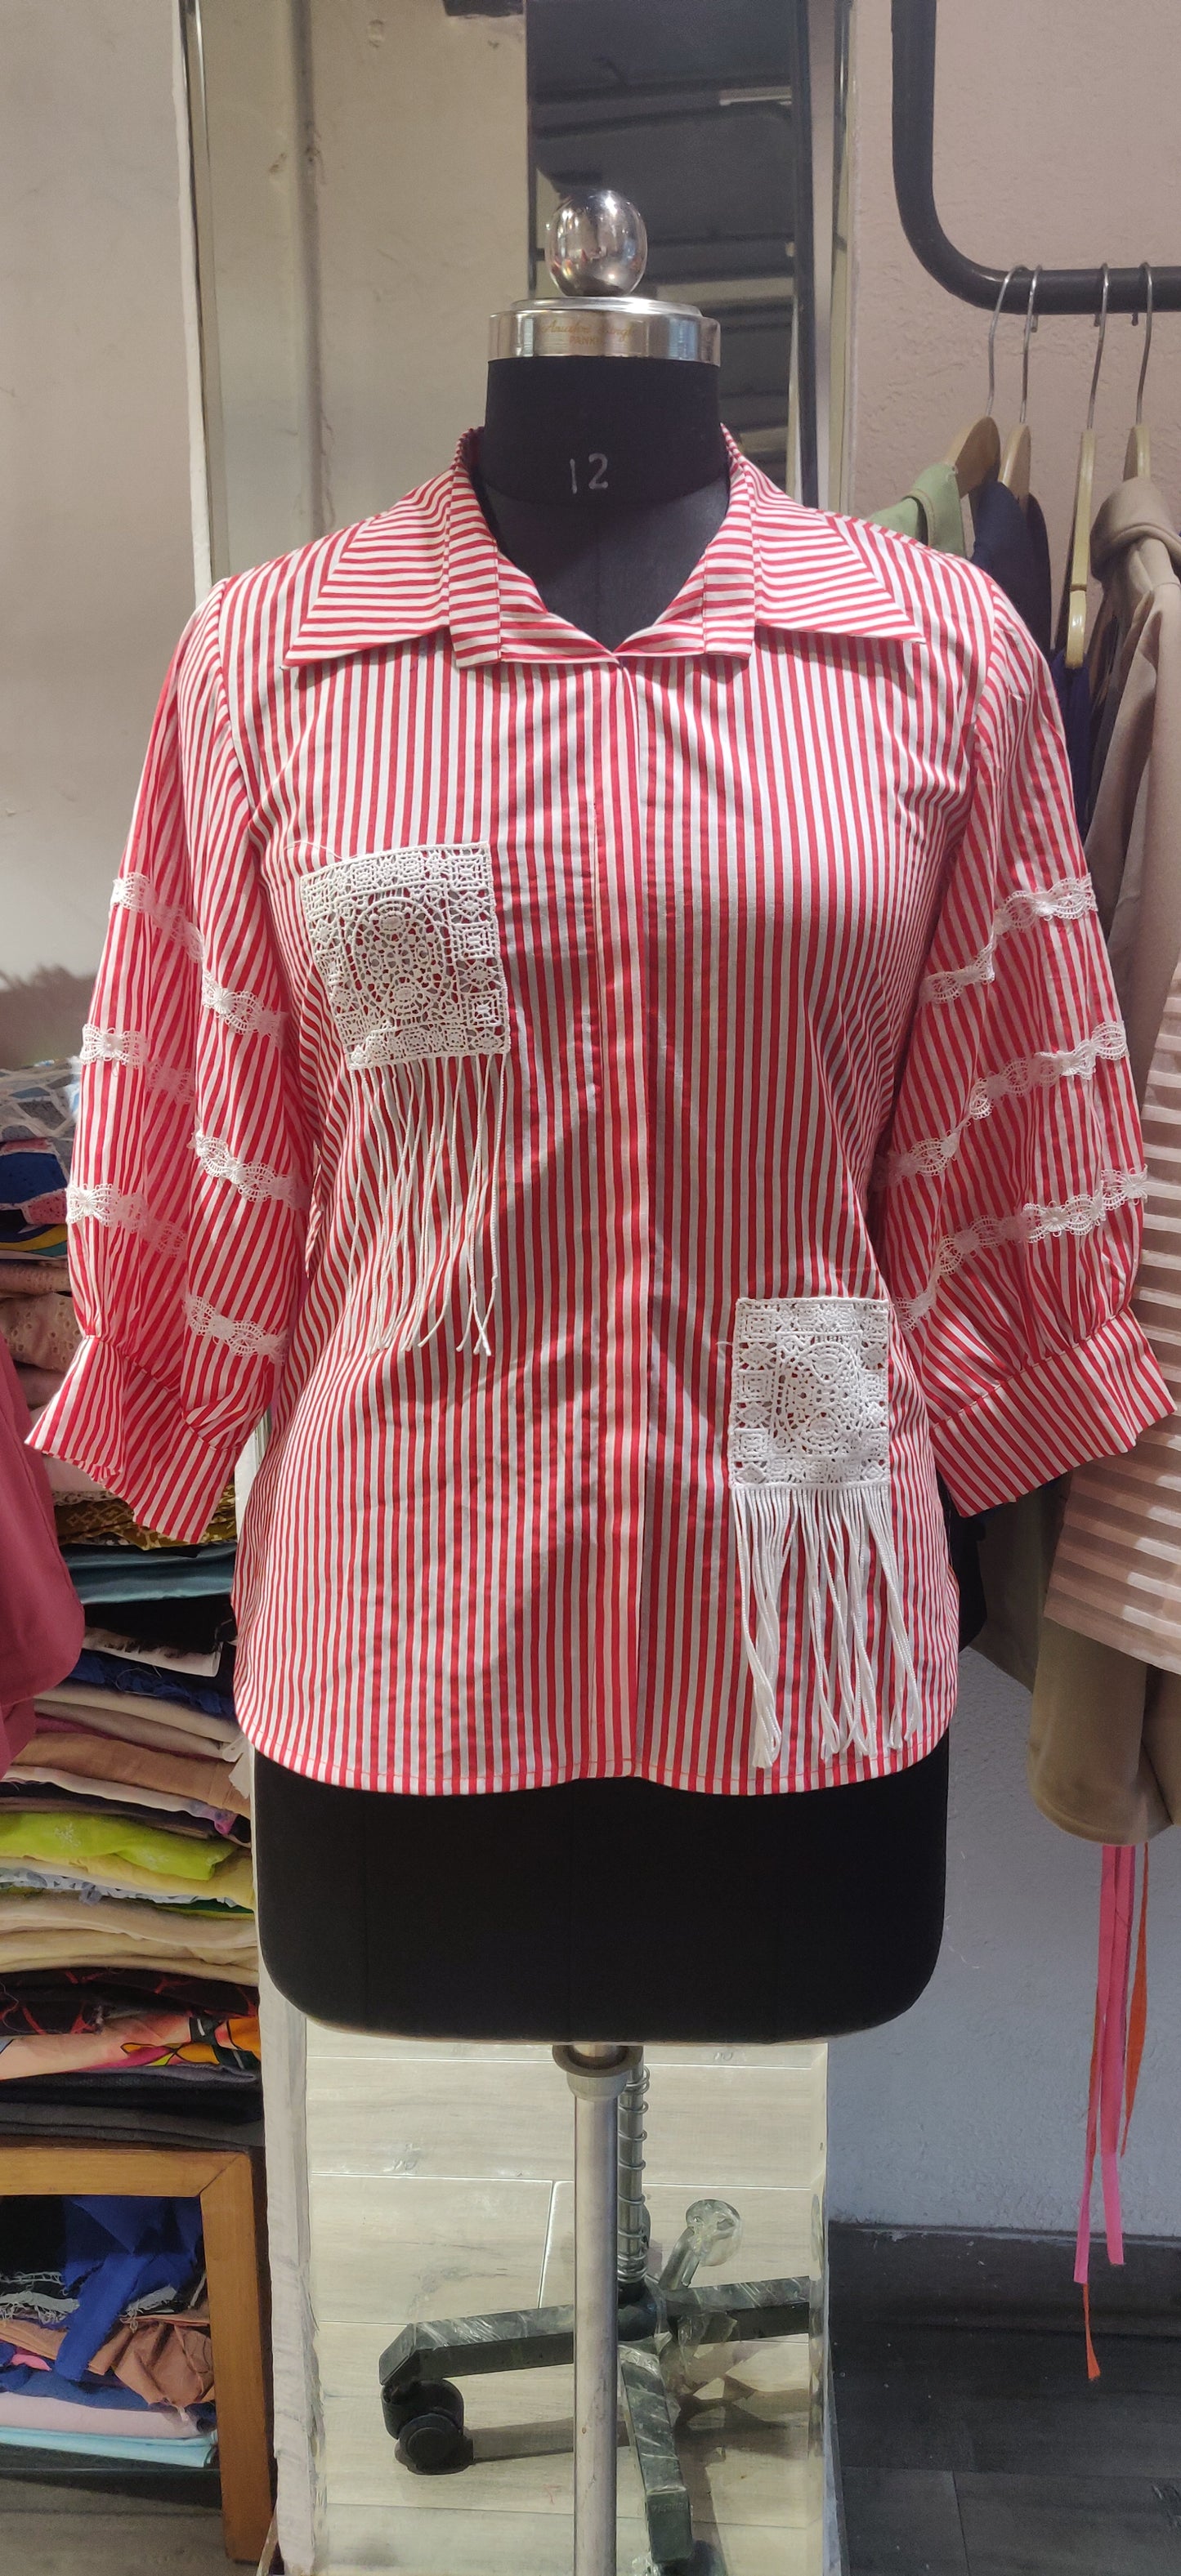 CLASSIC RED AND WHITE STRIPED SHIRT